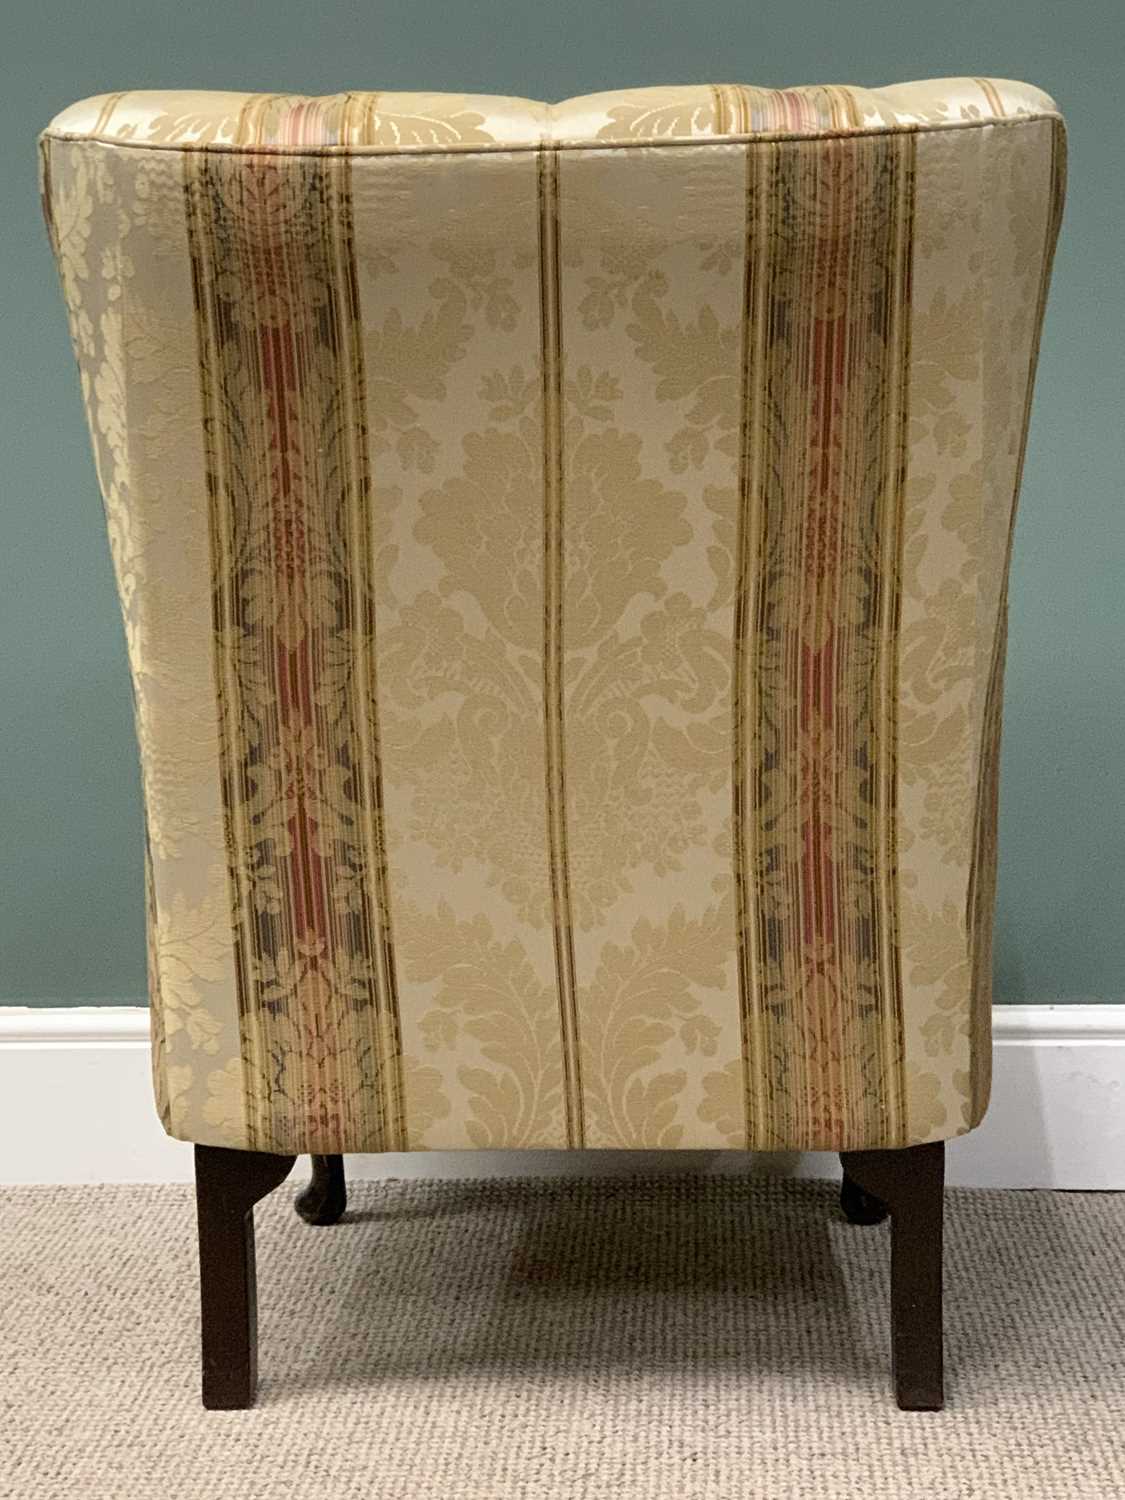 VINTAGE BUTTON BACK & UPHOLSTERED EASY CHAIR, 91 (h) x 66 (w) x 50 (d) cms Provenance: Private - Image 4 of 5